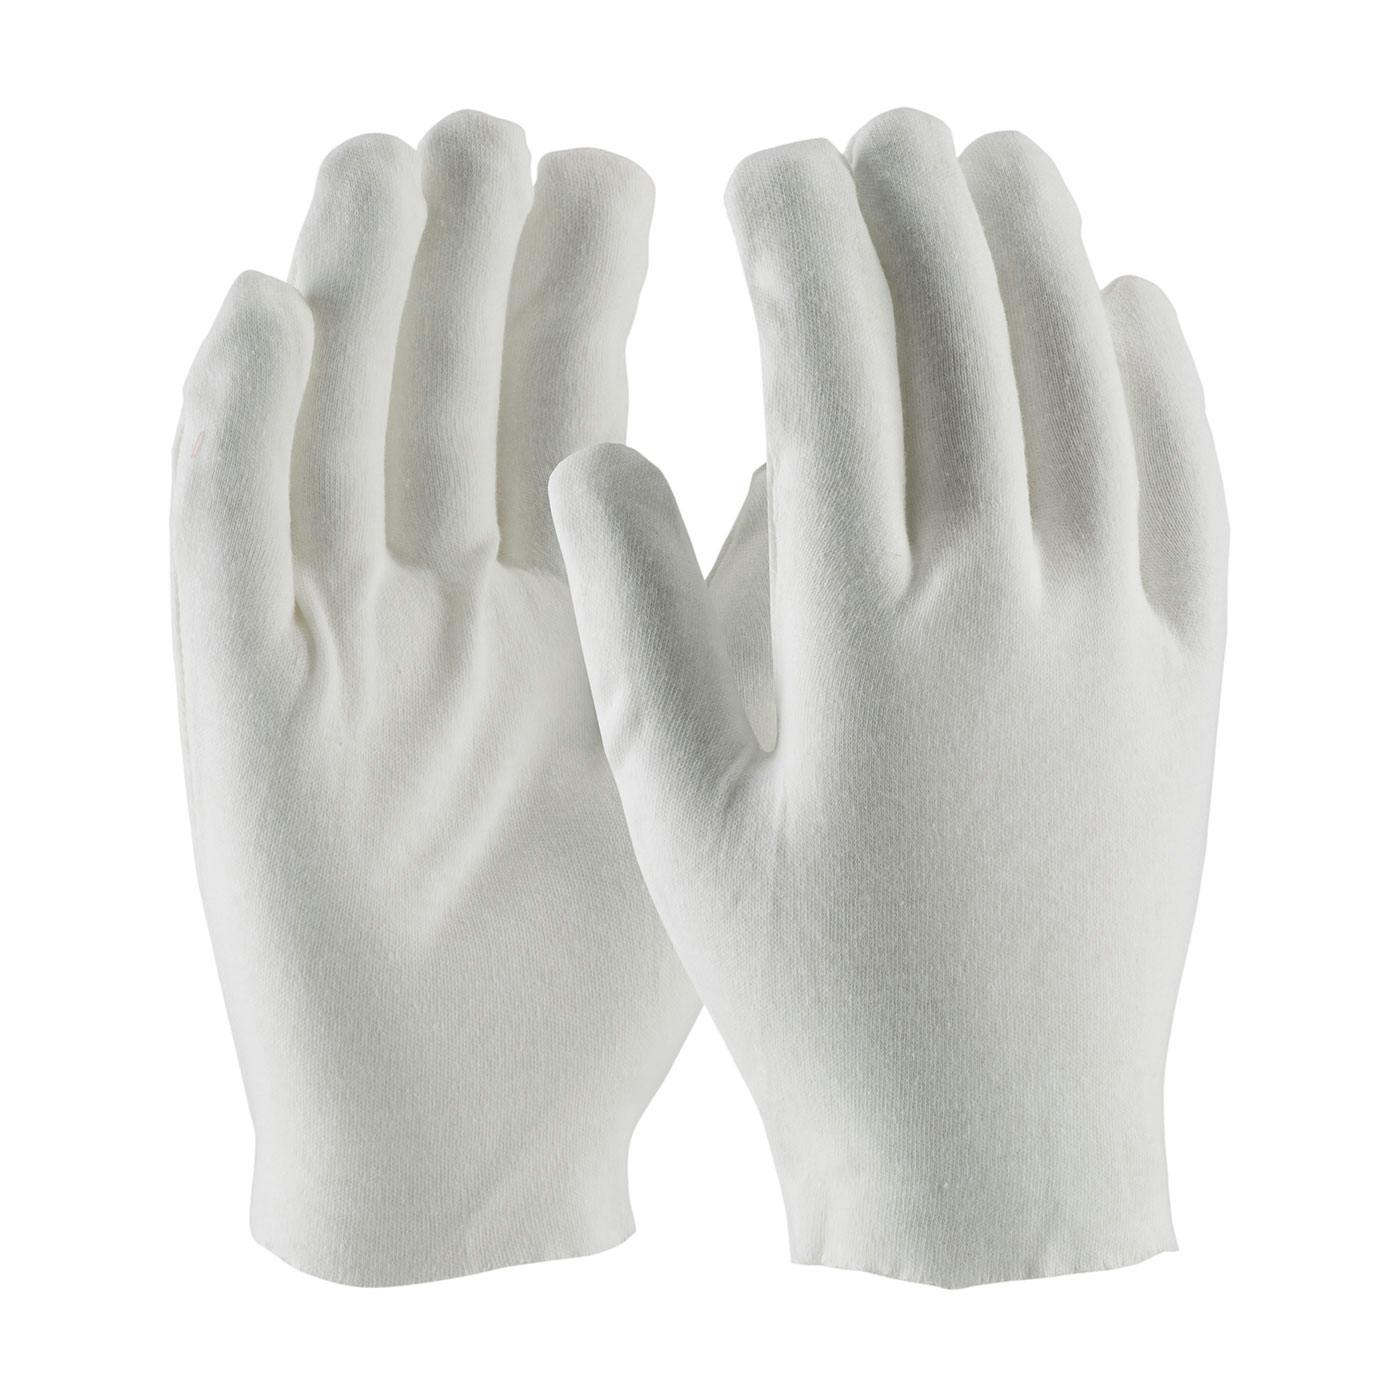 Heavy Weight Cotton Lisle Inspection Glove with Unhemmed Cuff - Men's, White (97-540) - MENS_0